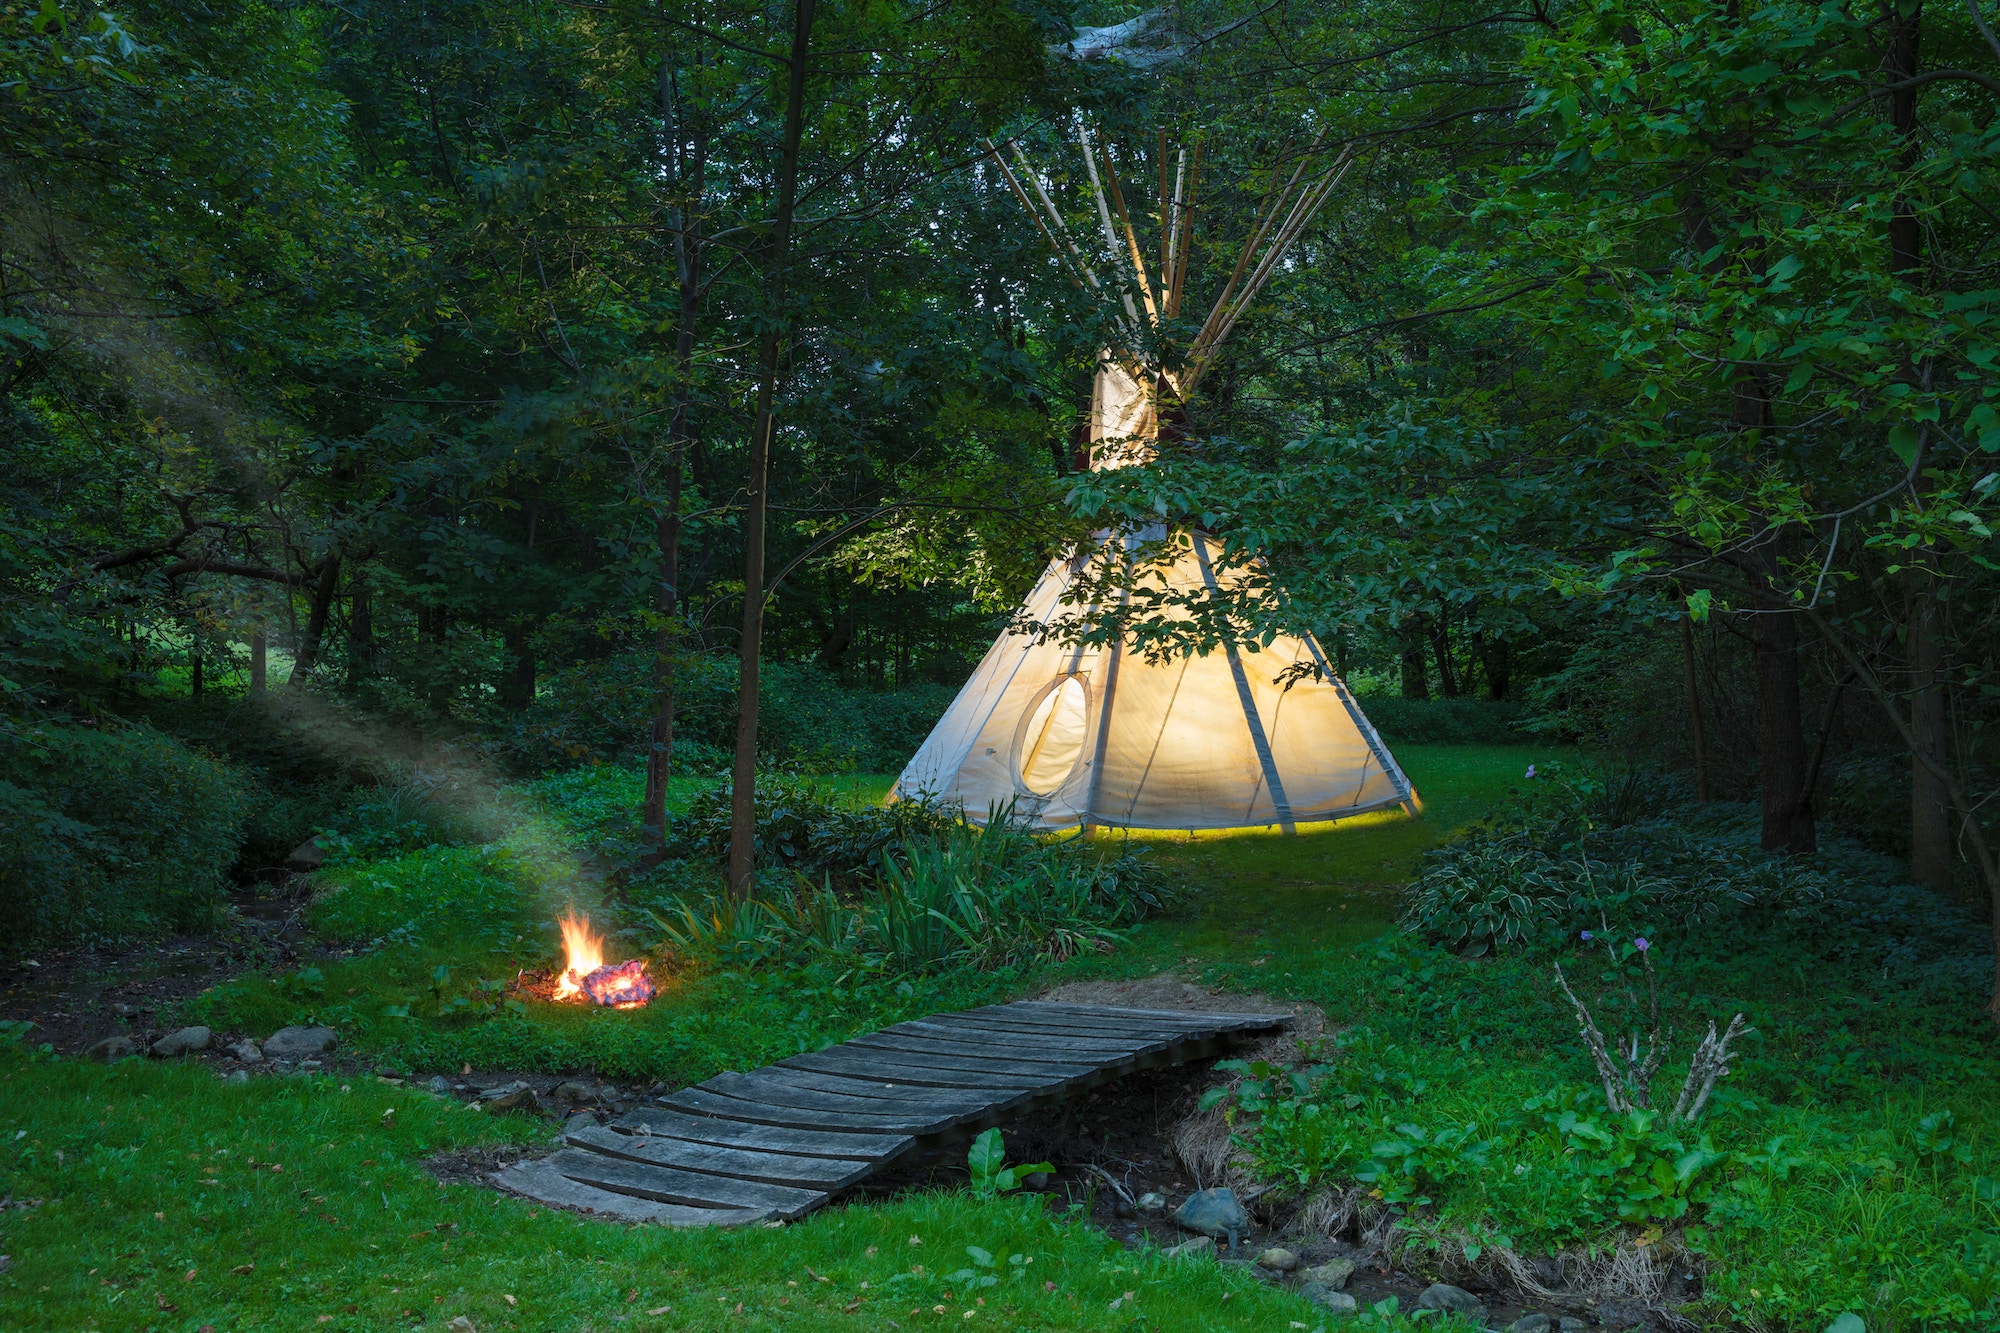 The Top 6 Gatlinburg Campgrounds to Explore on Your Next Trip